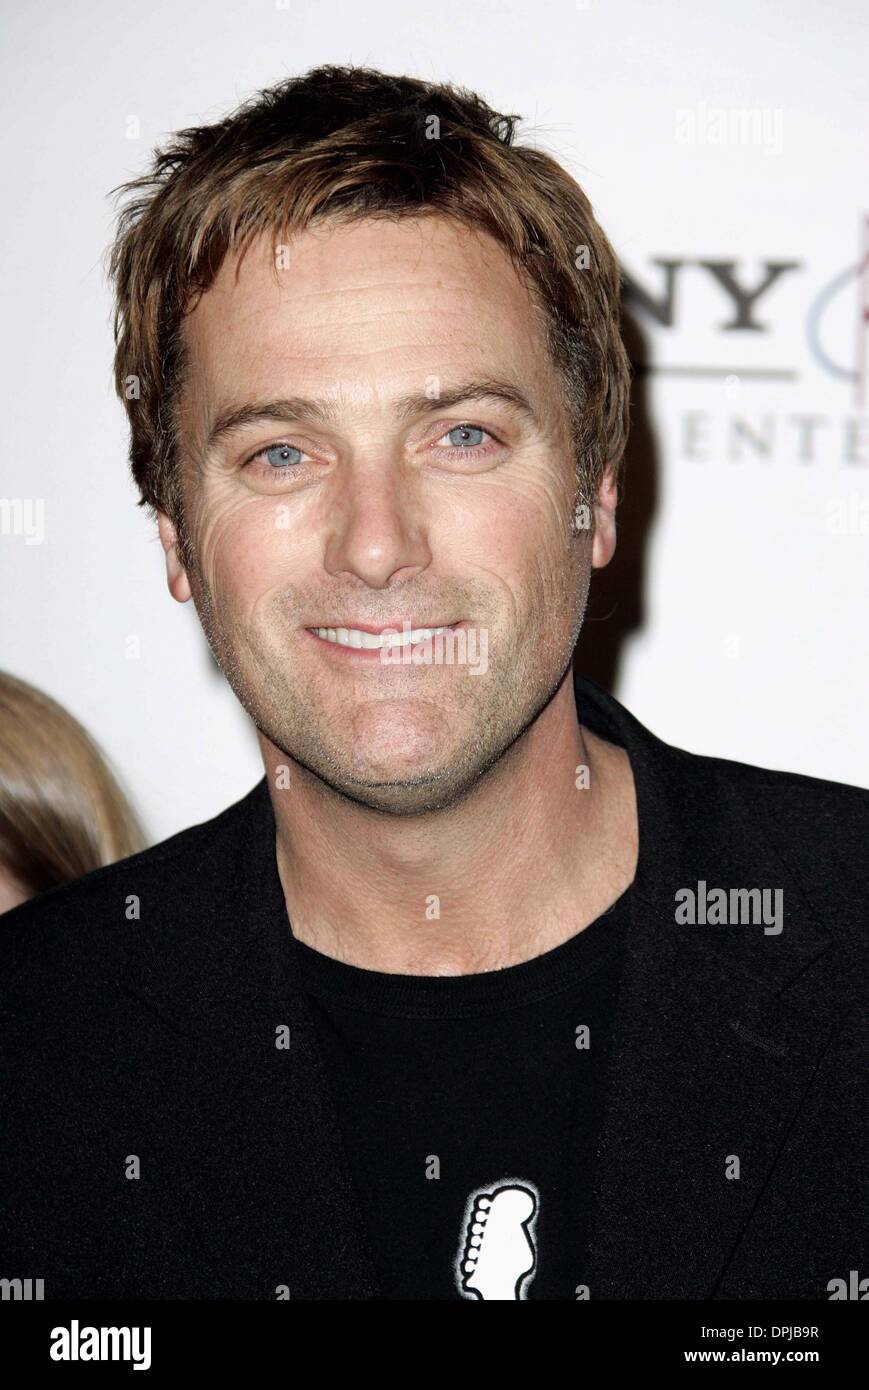 May 2, 2006 Roosevelt Hotel, LOS ANGELES, USA MICHAEL W. SMITH